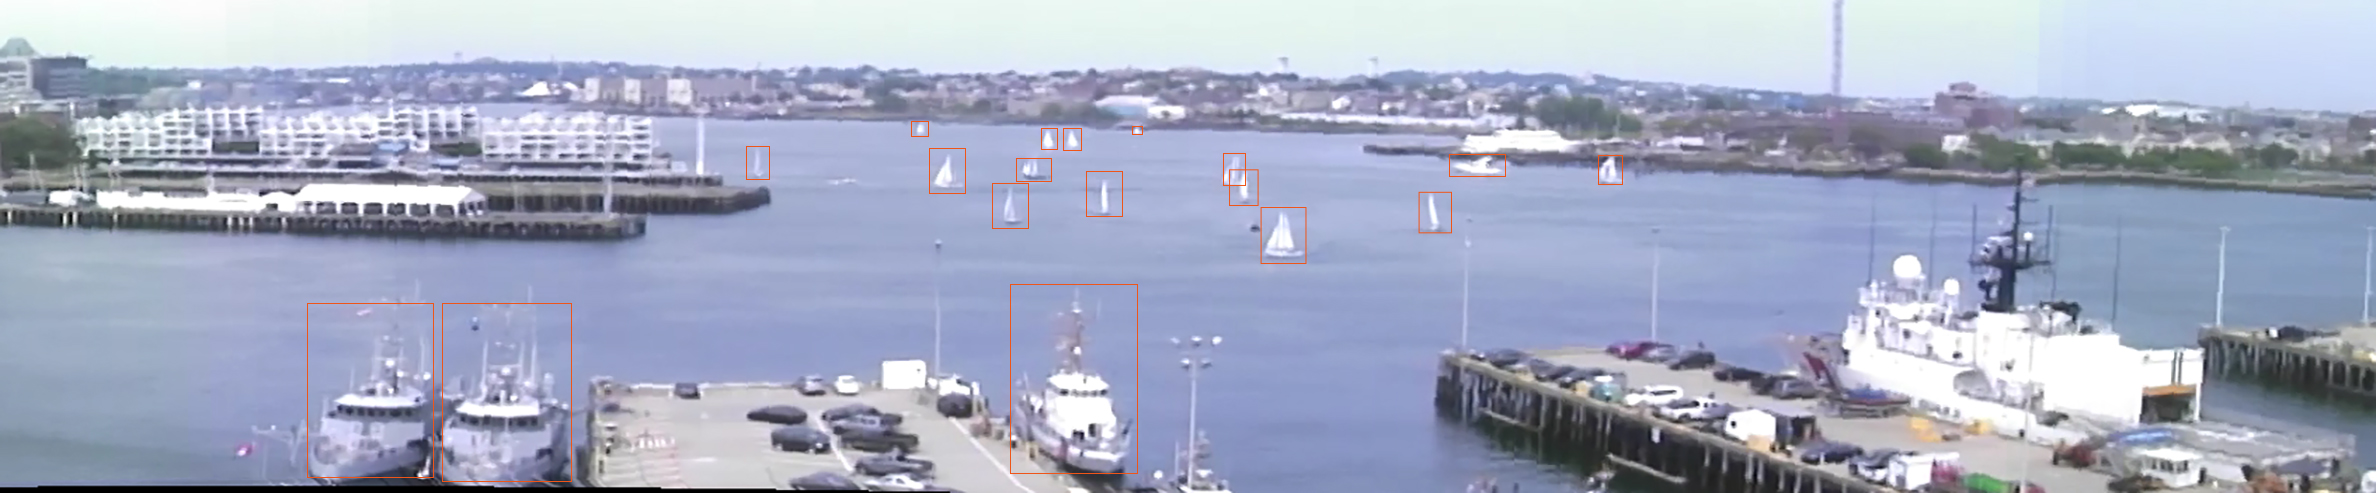 a photo of boston harbor with several boats on the water; each boat has an orange box drawn around it as a 'detection'